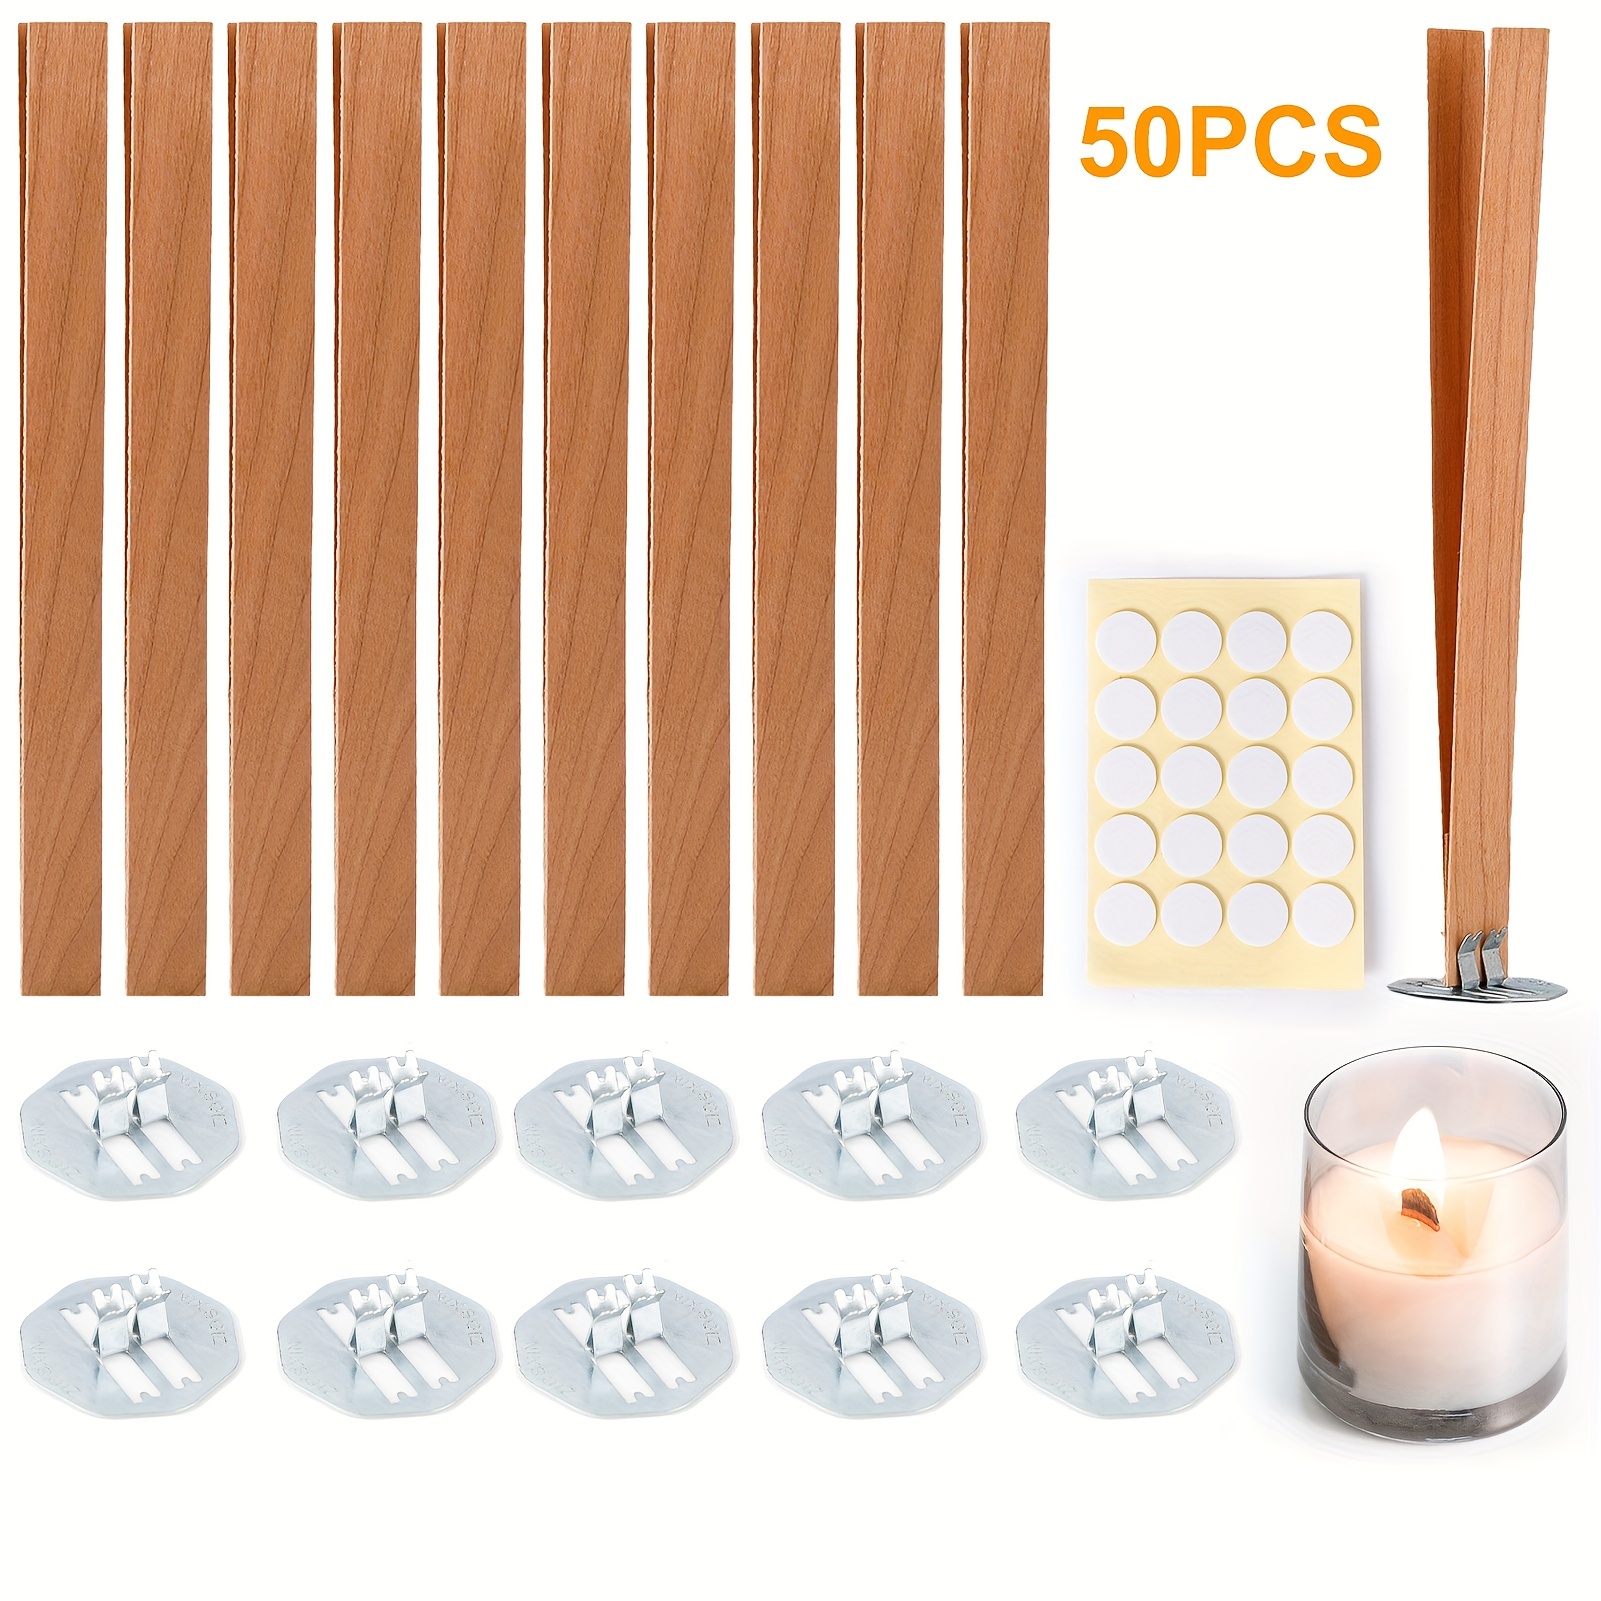 50Pcs Wooden Candle Wicks with Clips, 0.5 X 6 Inch Natural Wicks Suitable  for DIY Craft Candles Making , Smokeless & Natural Crackling Wood Wicks